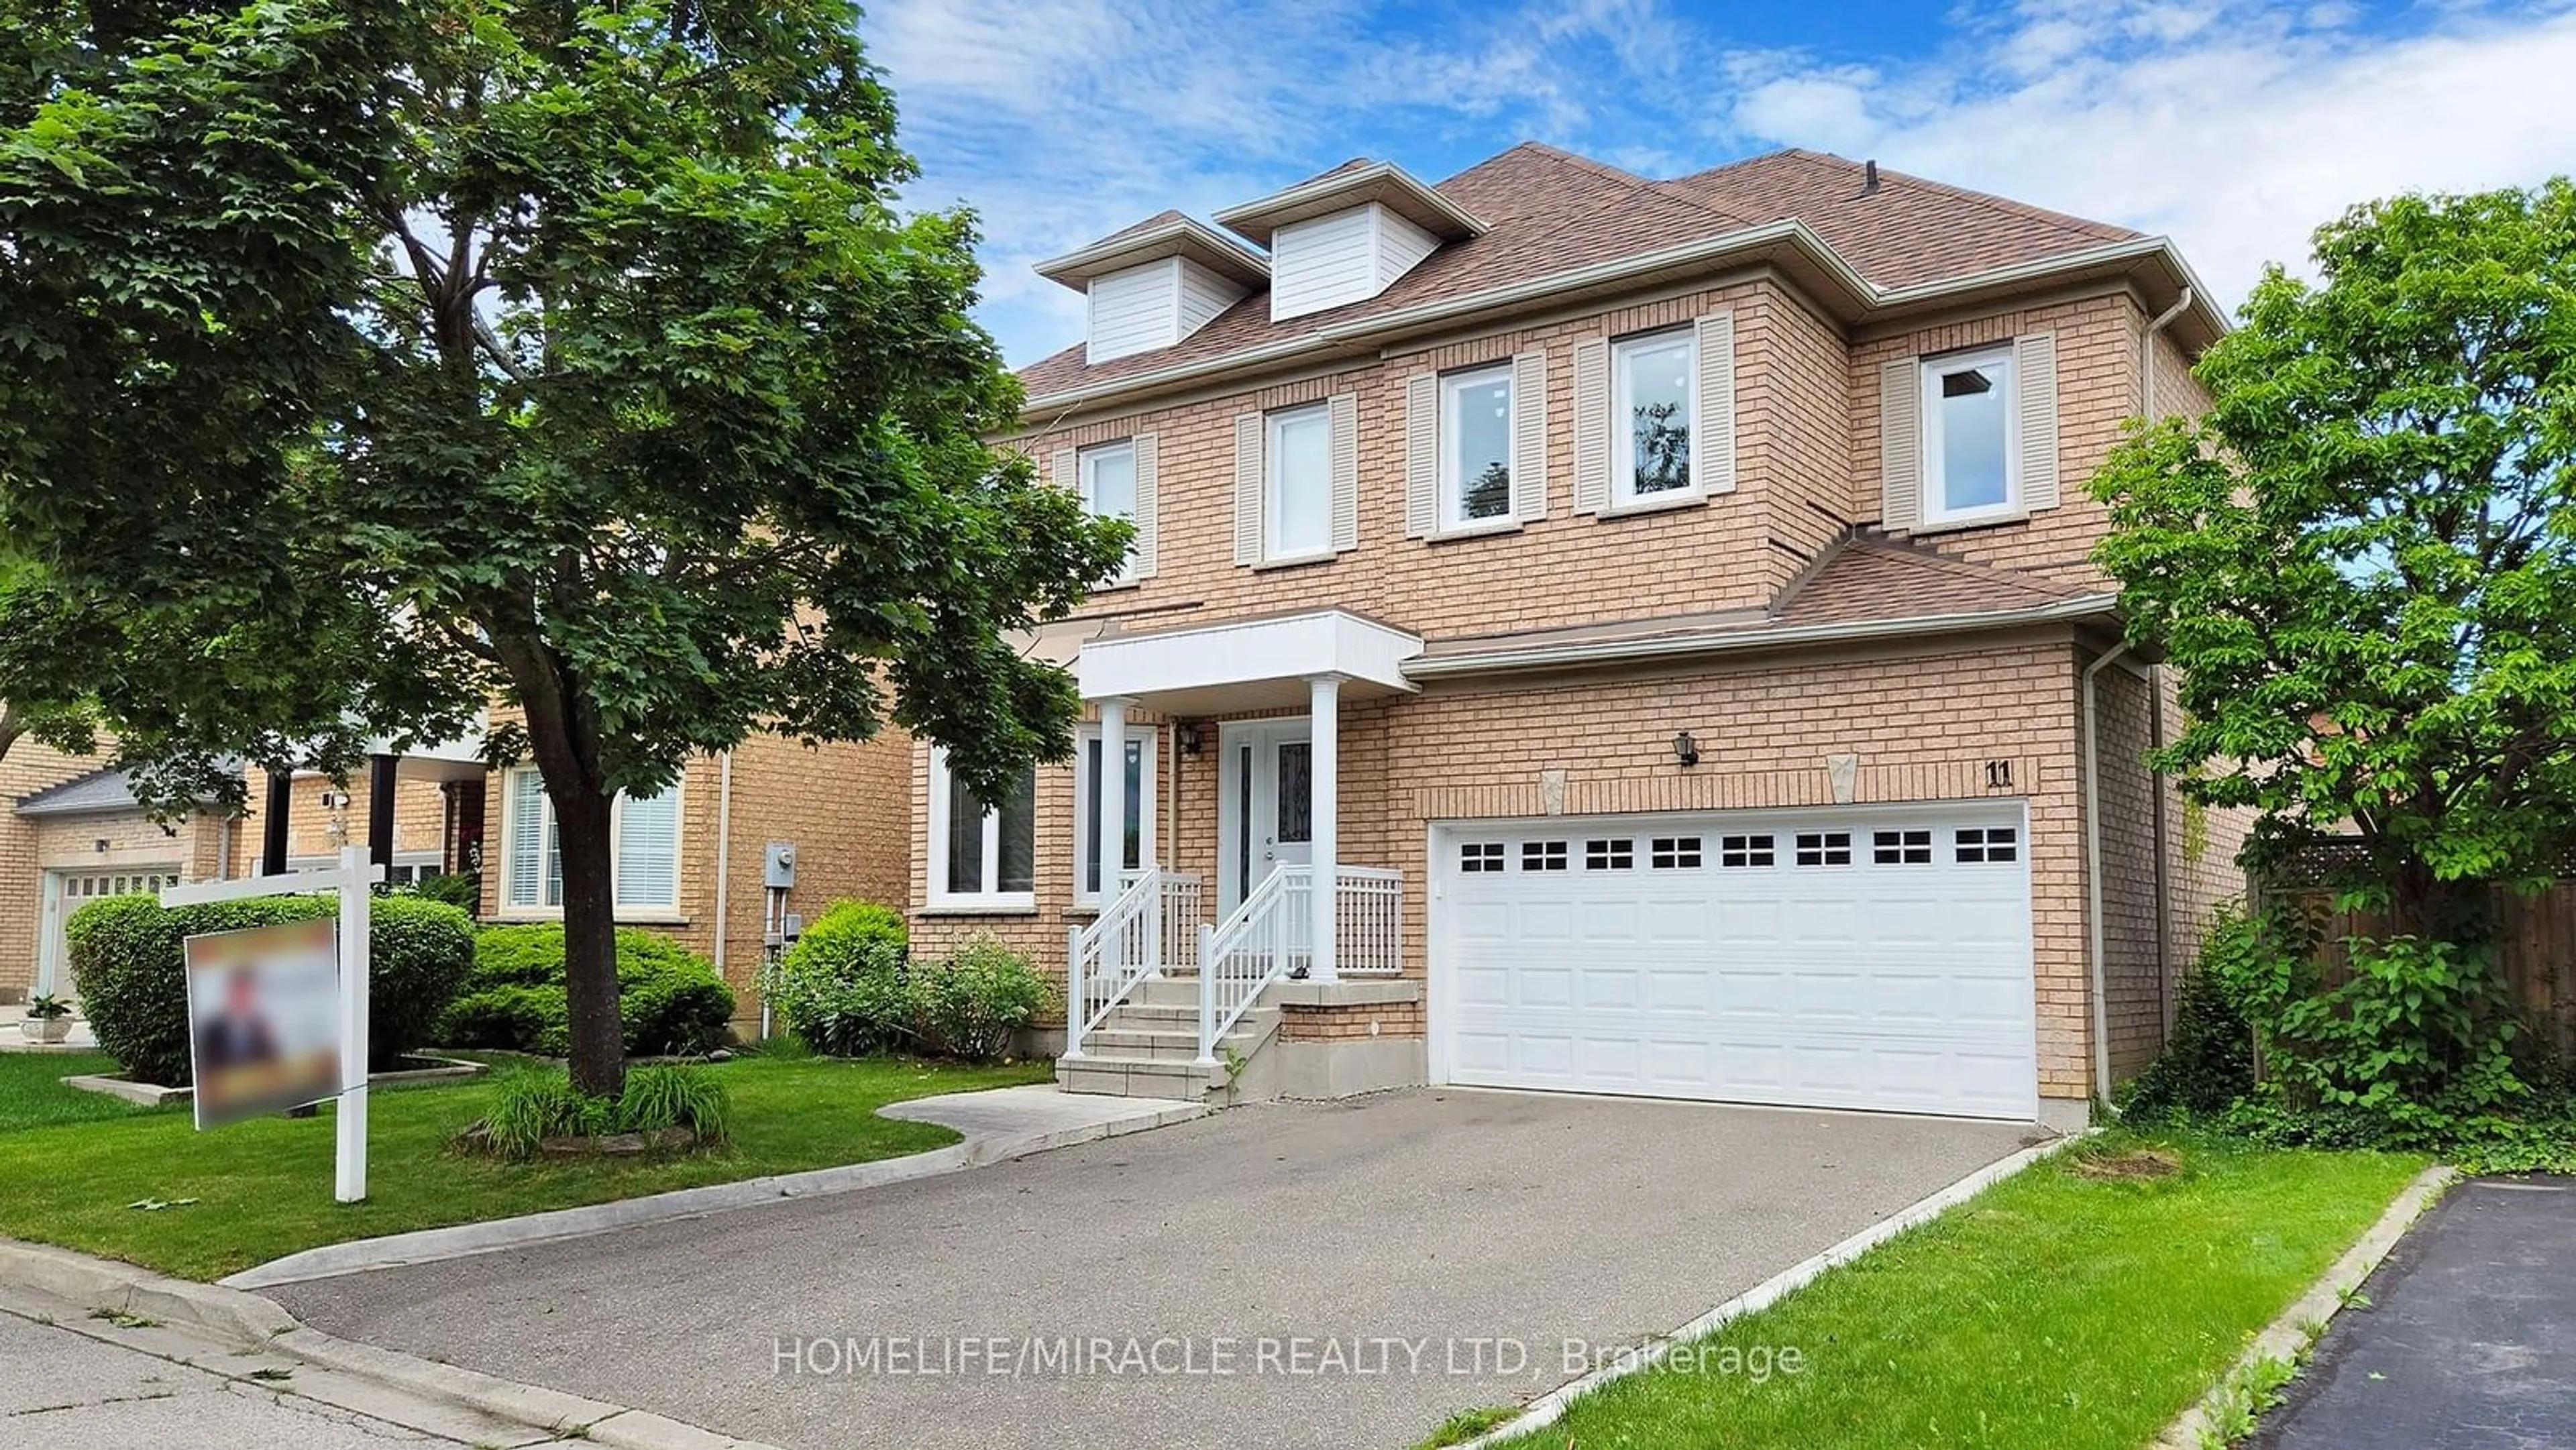 Home with brick exterior material for 11 BADGER Ave, Brampton Ontario L6R 1Z1